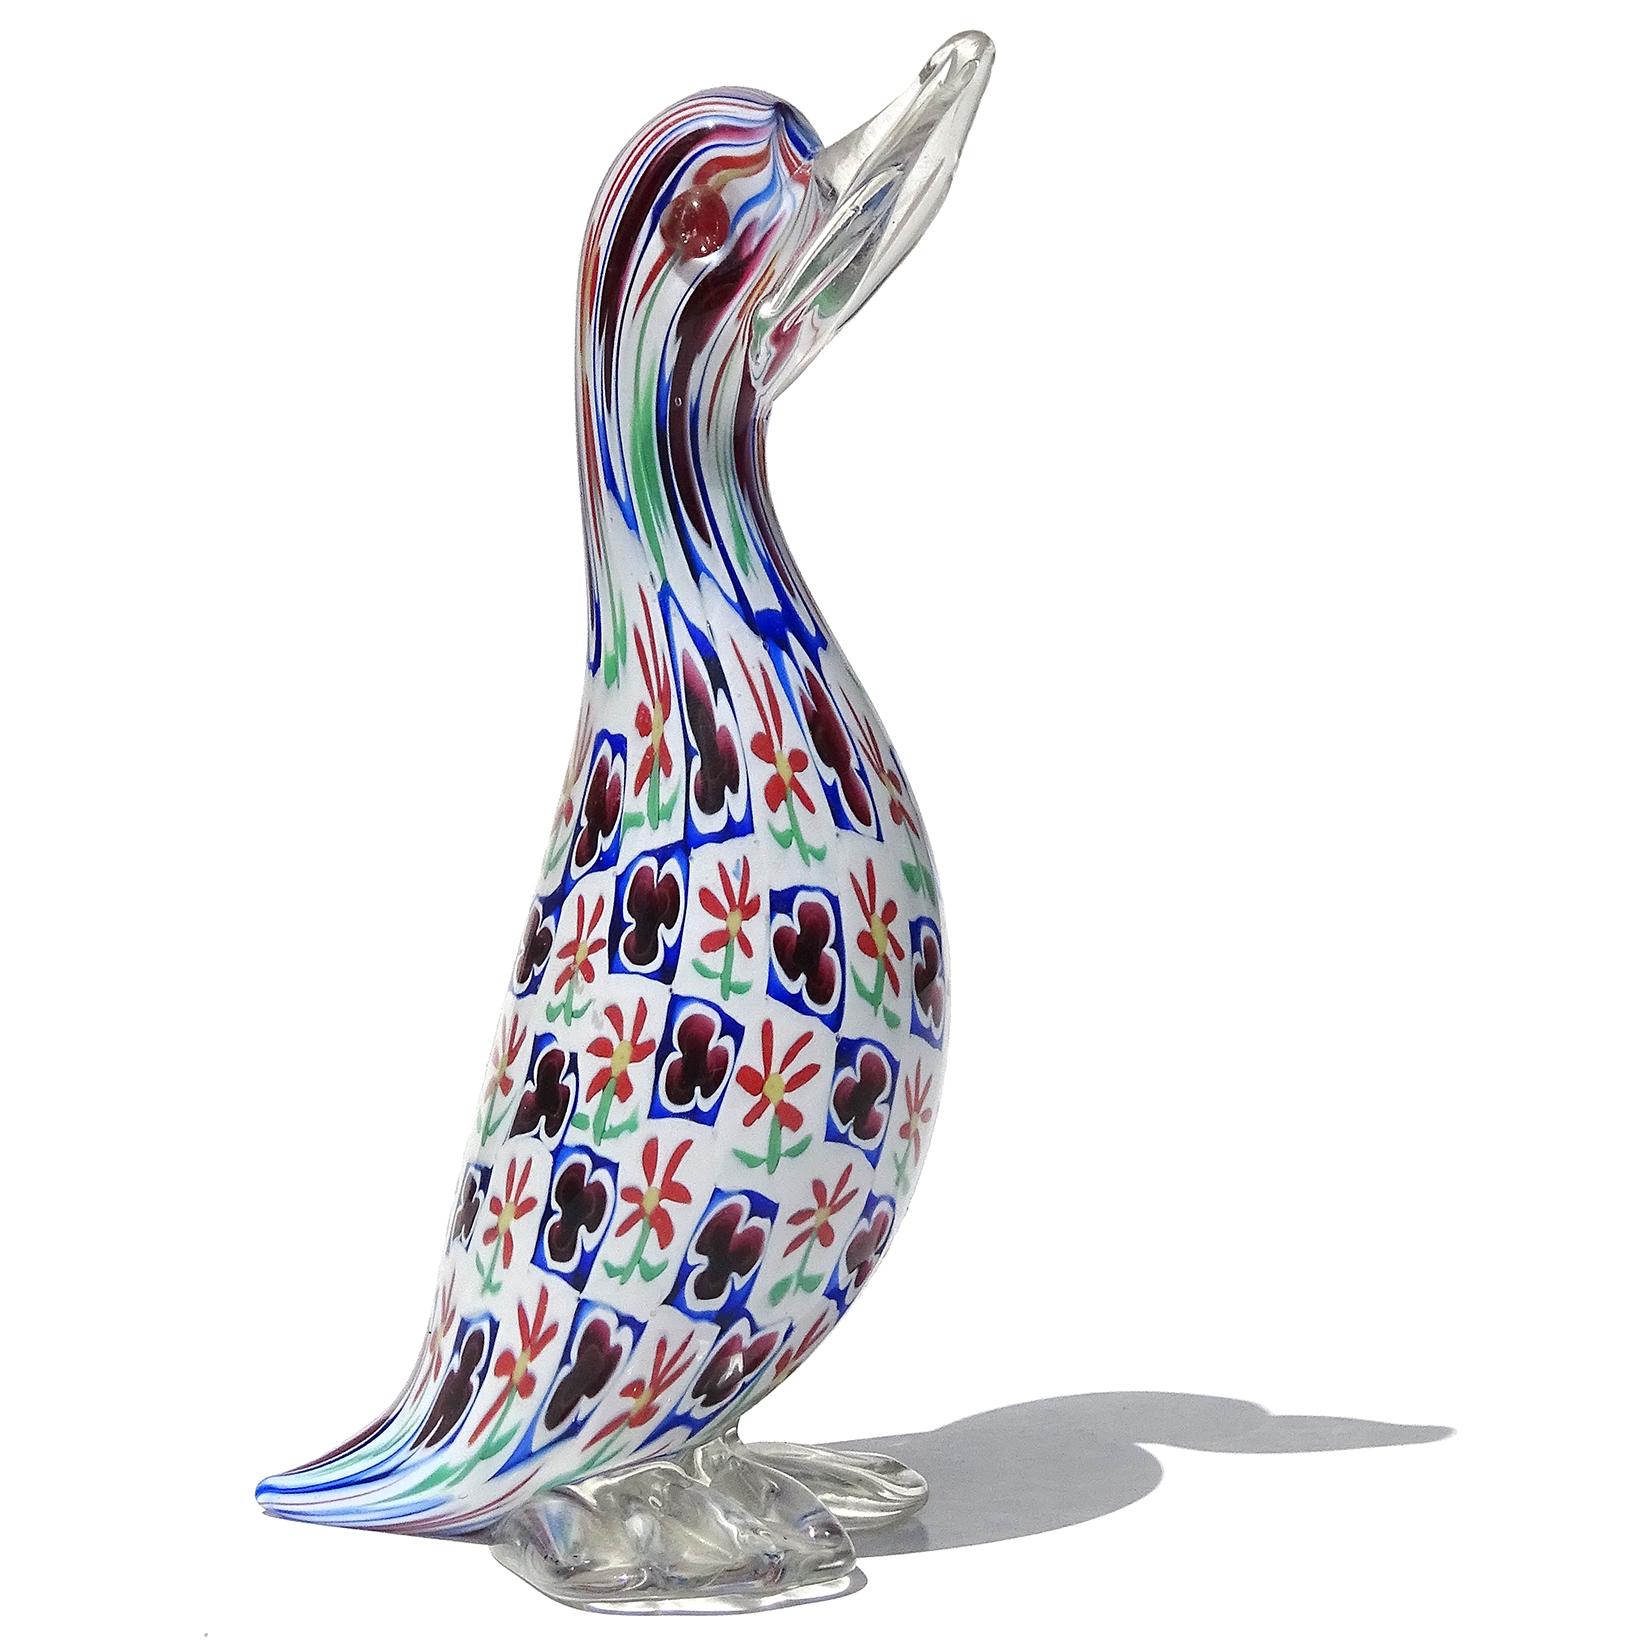 Beautiful vintage Murano hand blown Millefiori Murrina daisy flowers and clovers Italian art glass duck bird figurine / sculpture. Documented to the Fratelli Toso company. The 2 different murrines in the body create a unique checker board